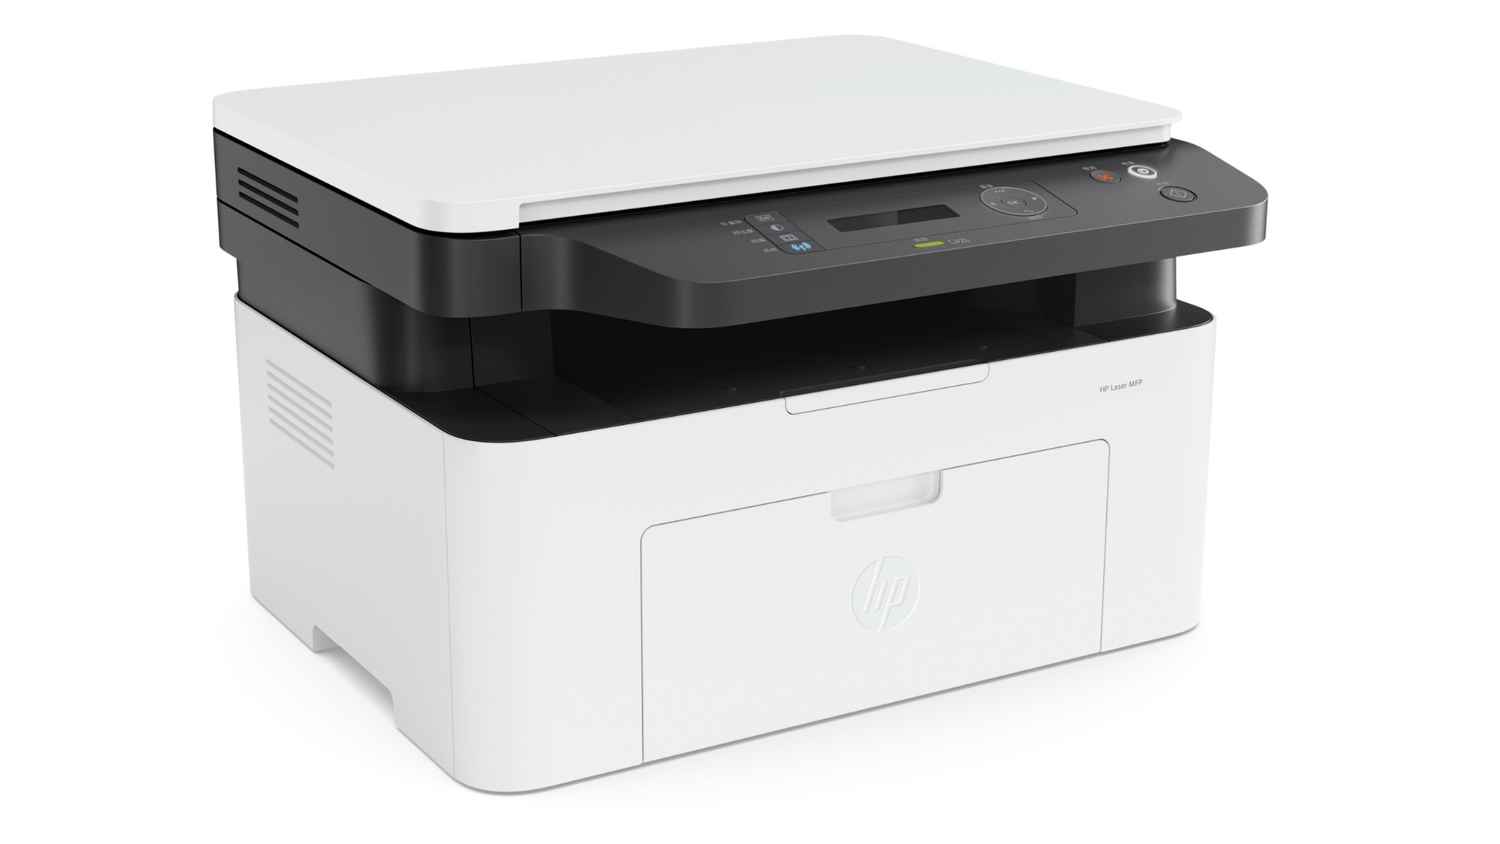 HP laser printers launched in India for home office and small businesses